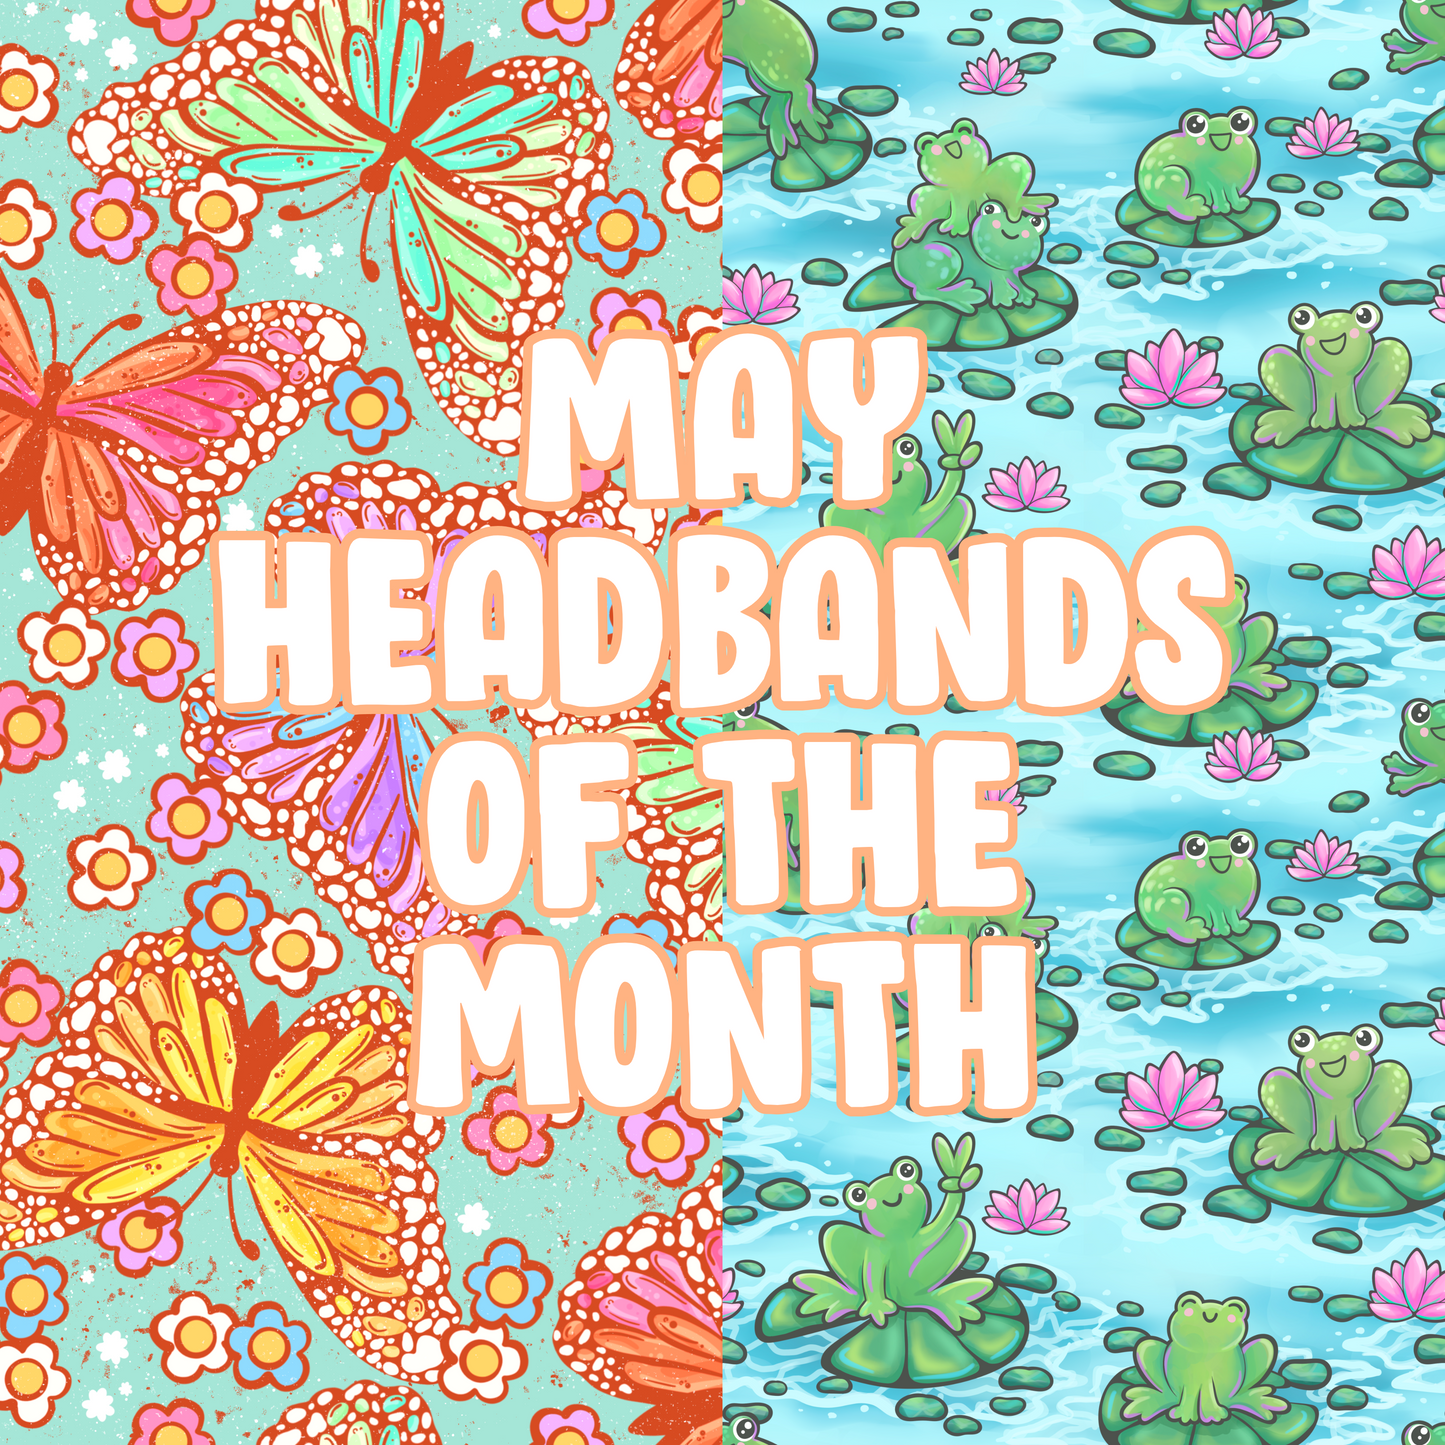 Headbands of the Month